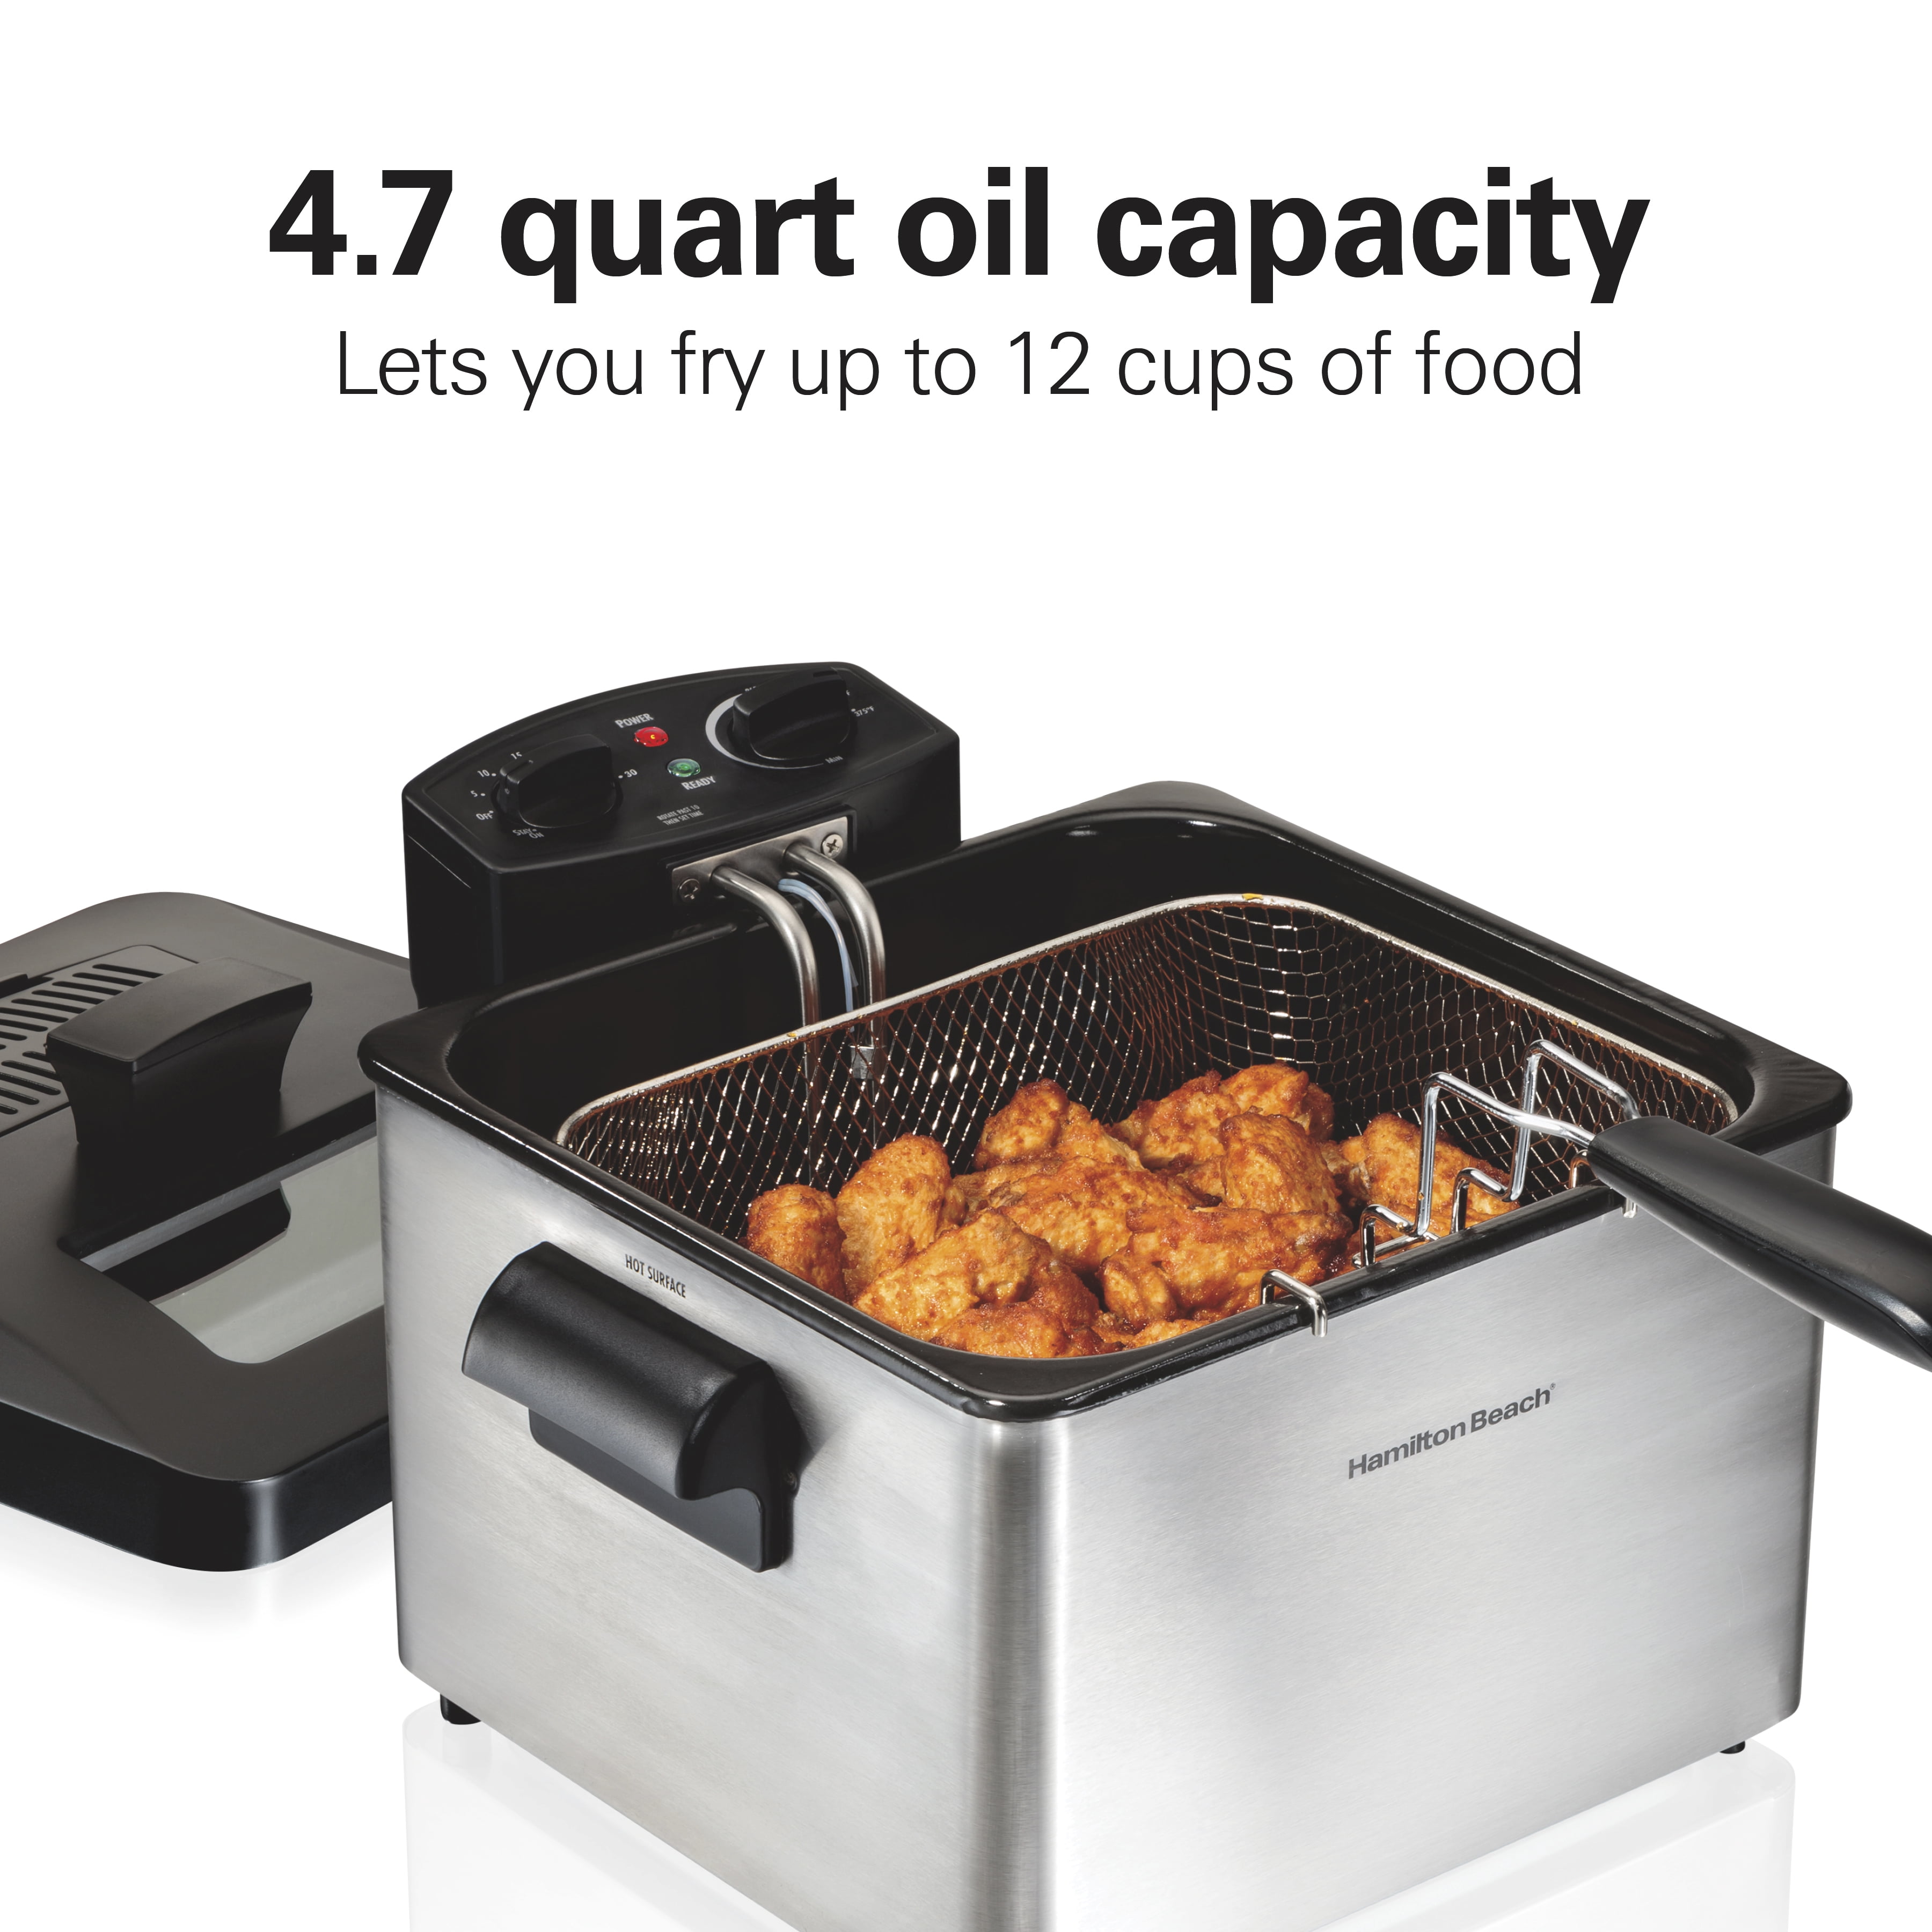 Shopsmart - Get Frying and create great dishes with the Hamilton Beach Deep  Fryer.